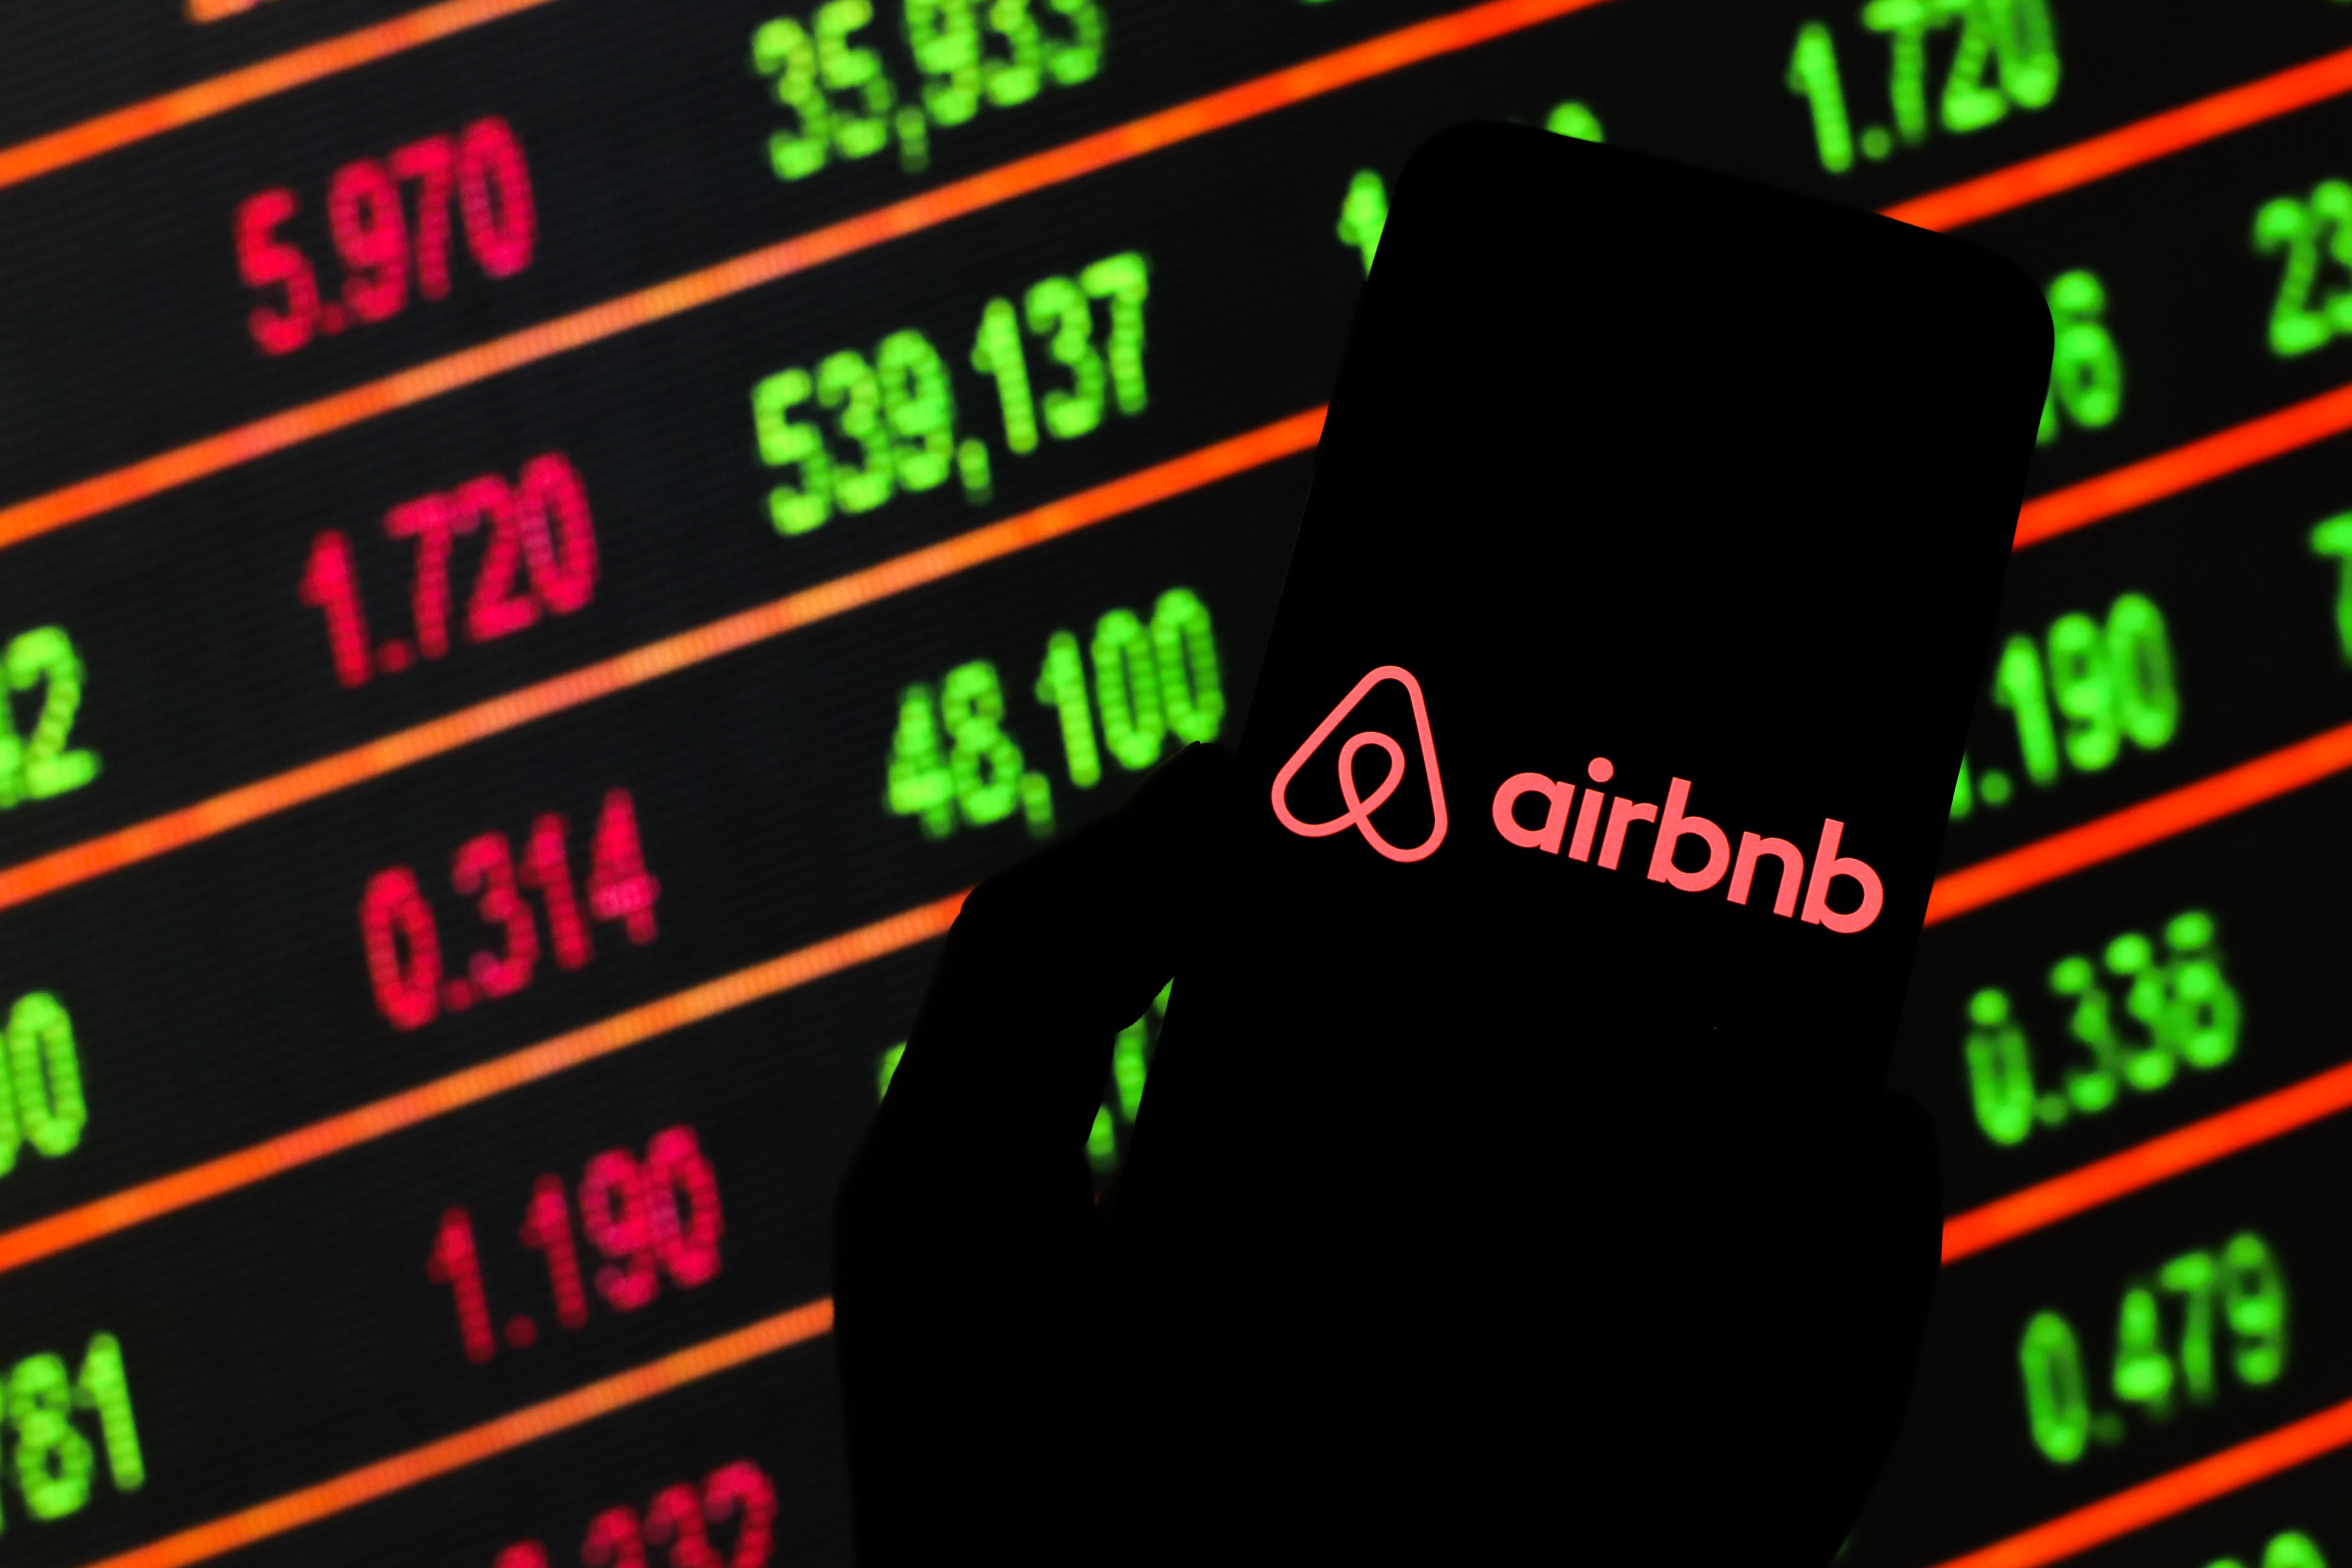 Airbnb Prices Ipo With Up To A 42 Billion Valuation